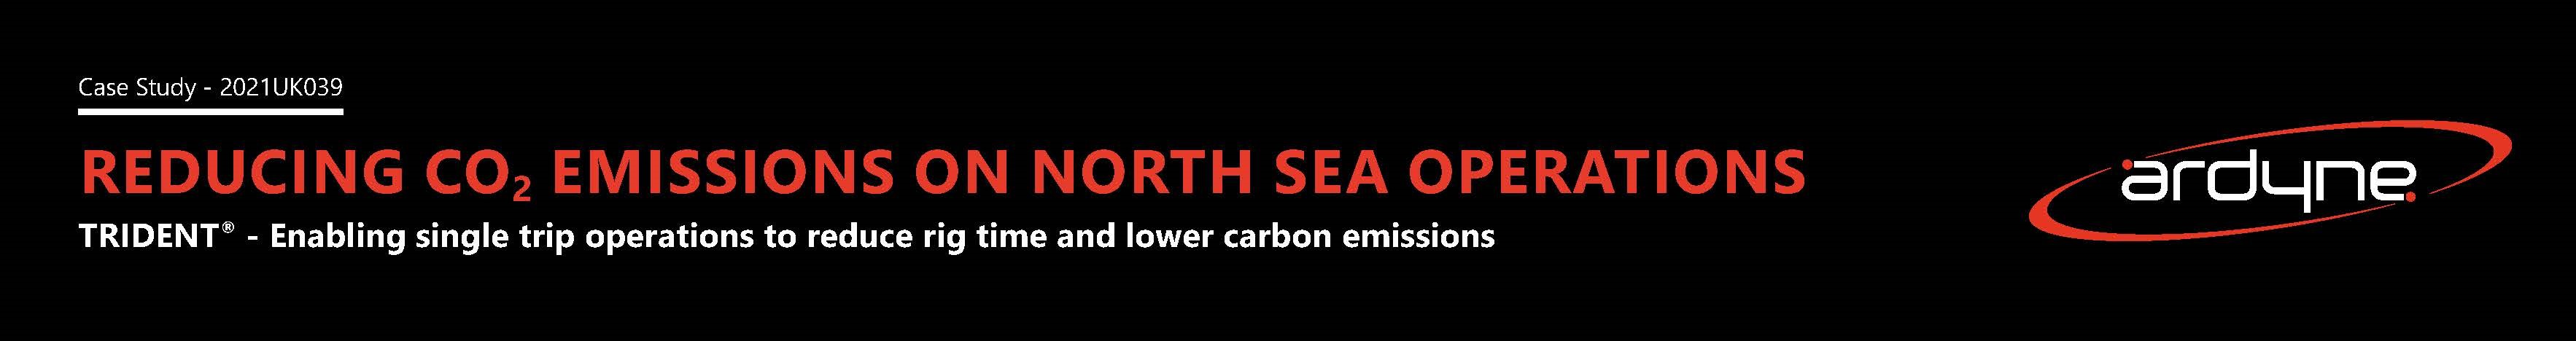 Reducing CO2 Emissions on North Sea Operations